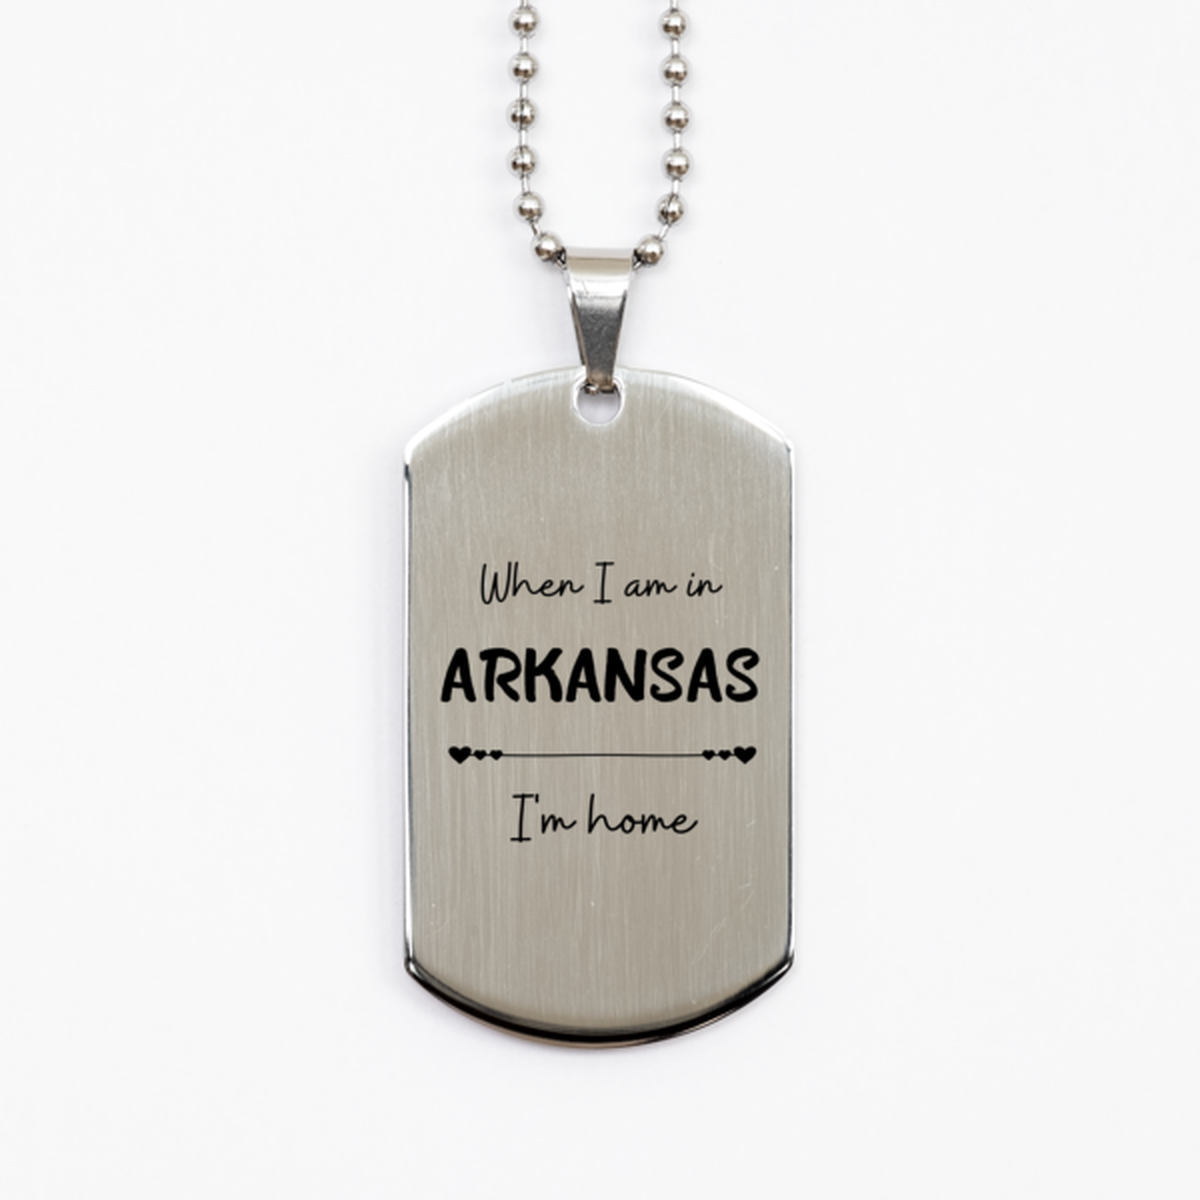 When I am in Arkansas I'm home Silver Dog Tag, Cheap Gifts For Arkansas, State Arkansas Birthday Gifts for Friends Coworker